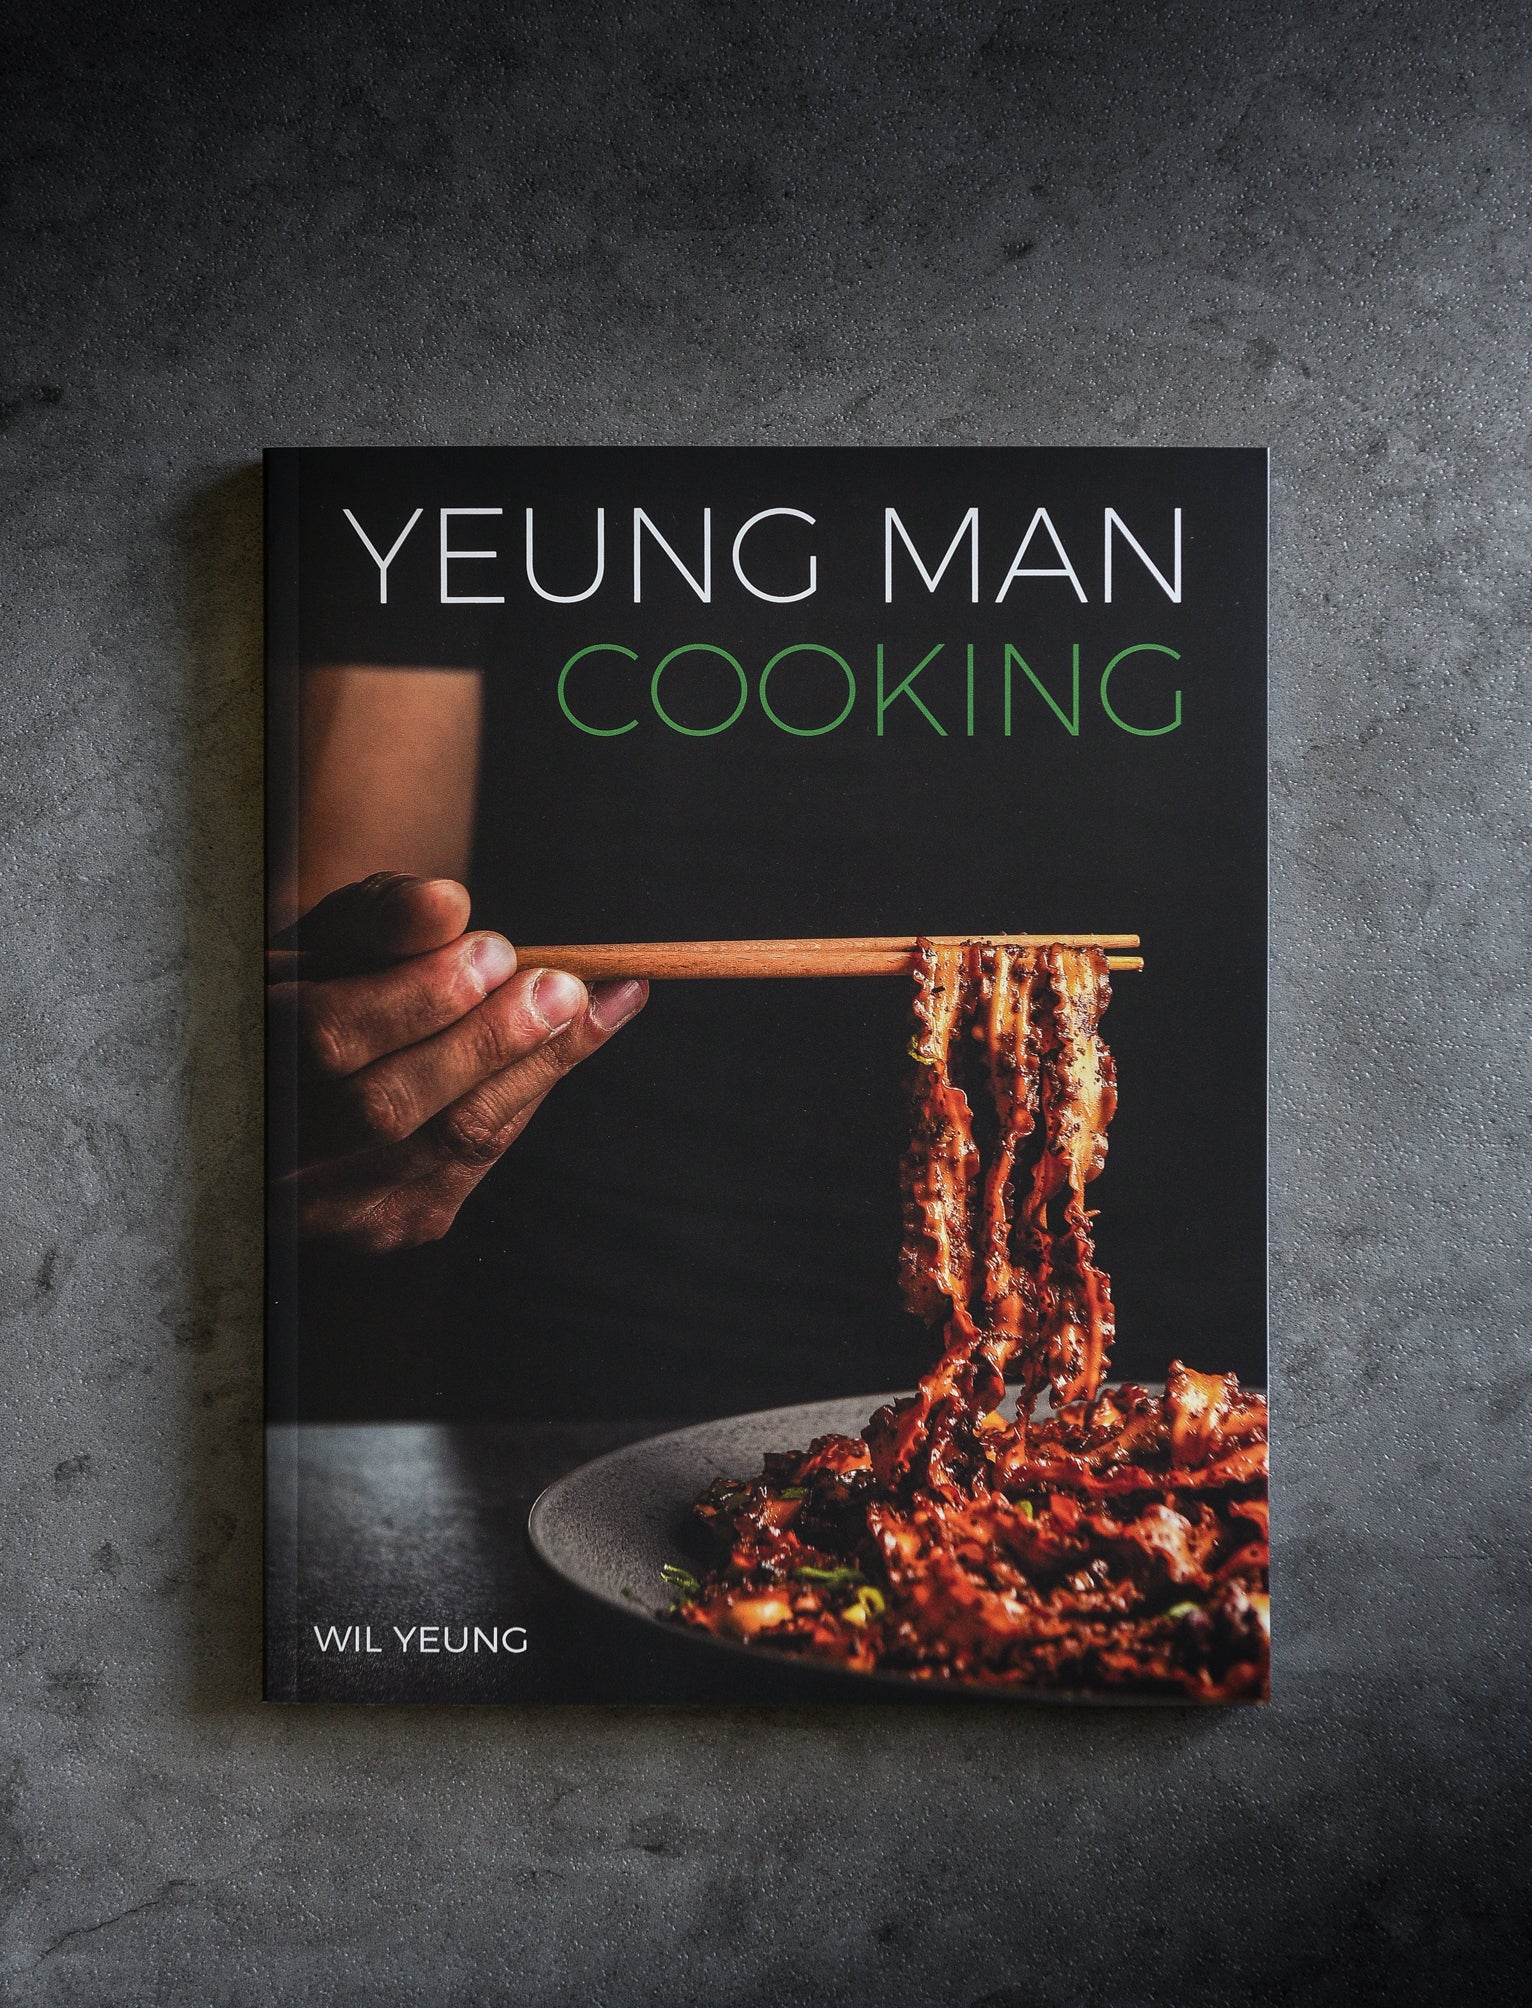 SIGNED PRINT BOOK - YEUNG MAN COOKING